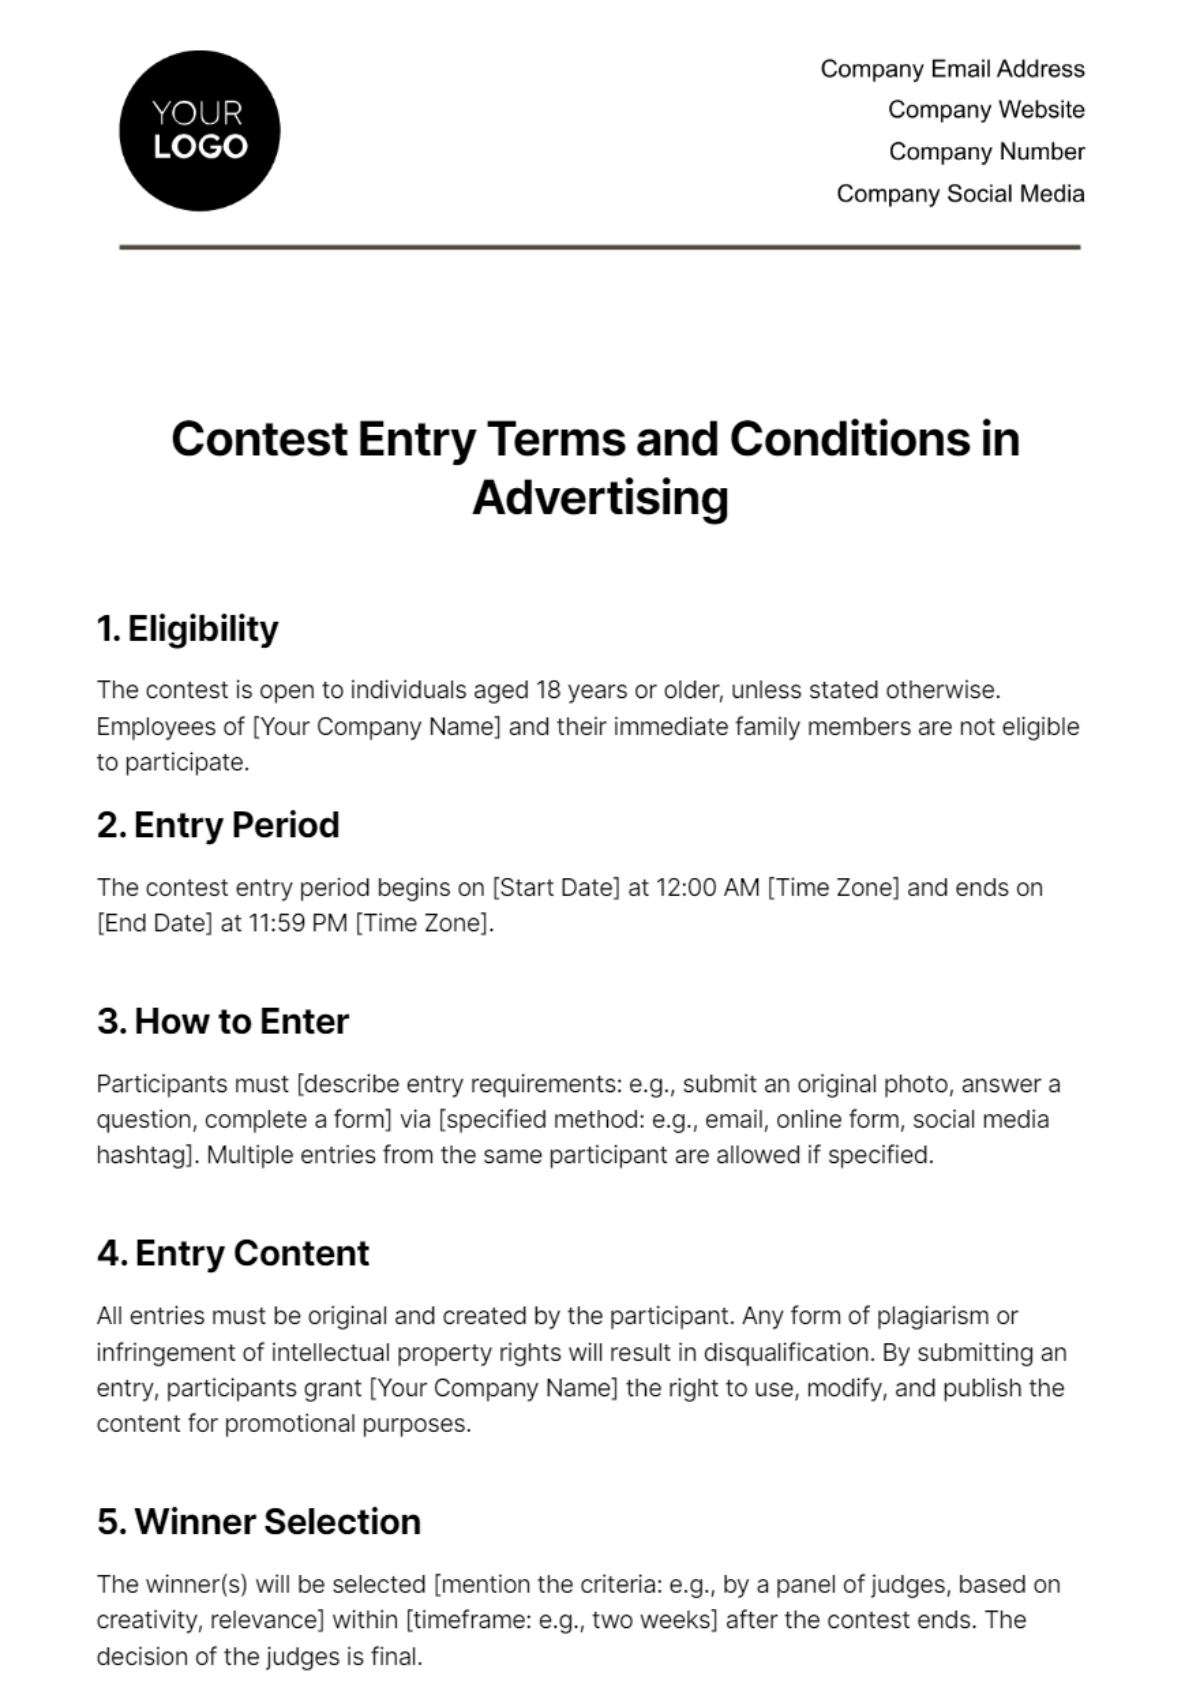 Free Contest Entry Terms and Conditions in Advertising Template